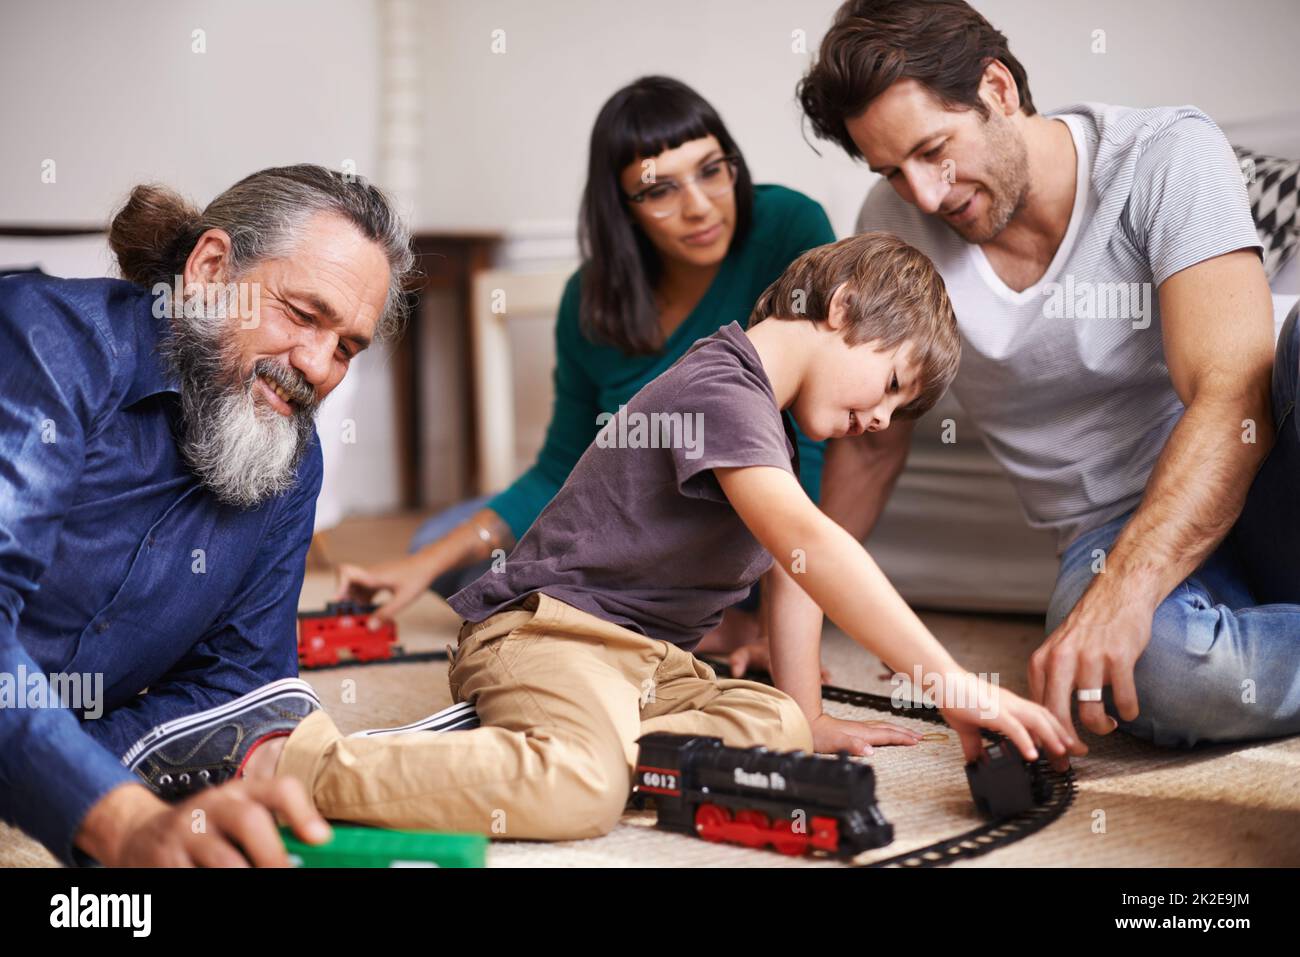 Family fun on the railroad. Cropped shot of a young child playing with a train set while his family watches. Stock Photo